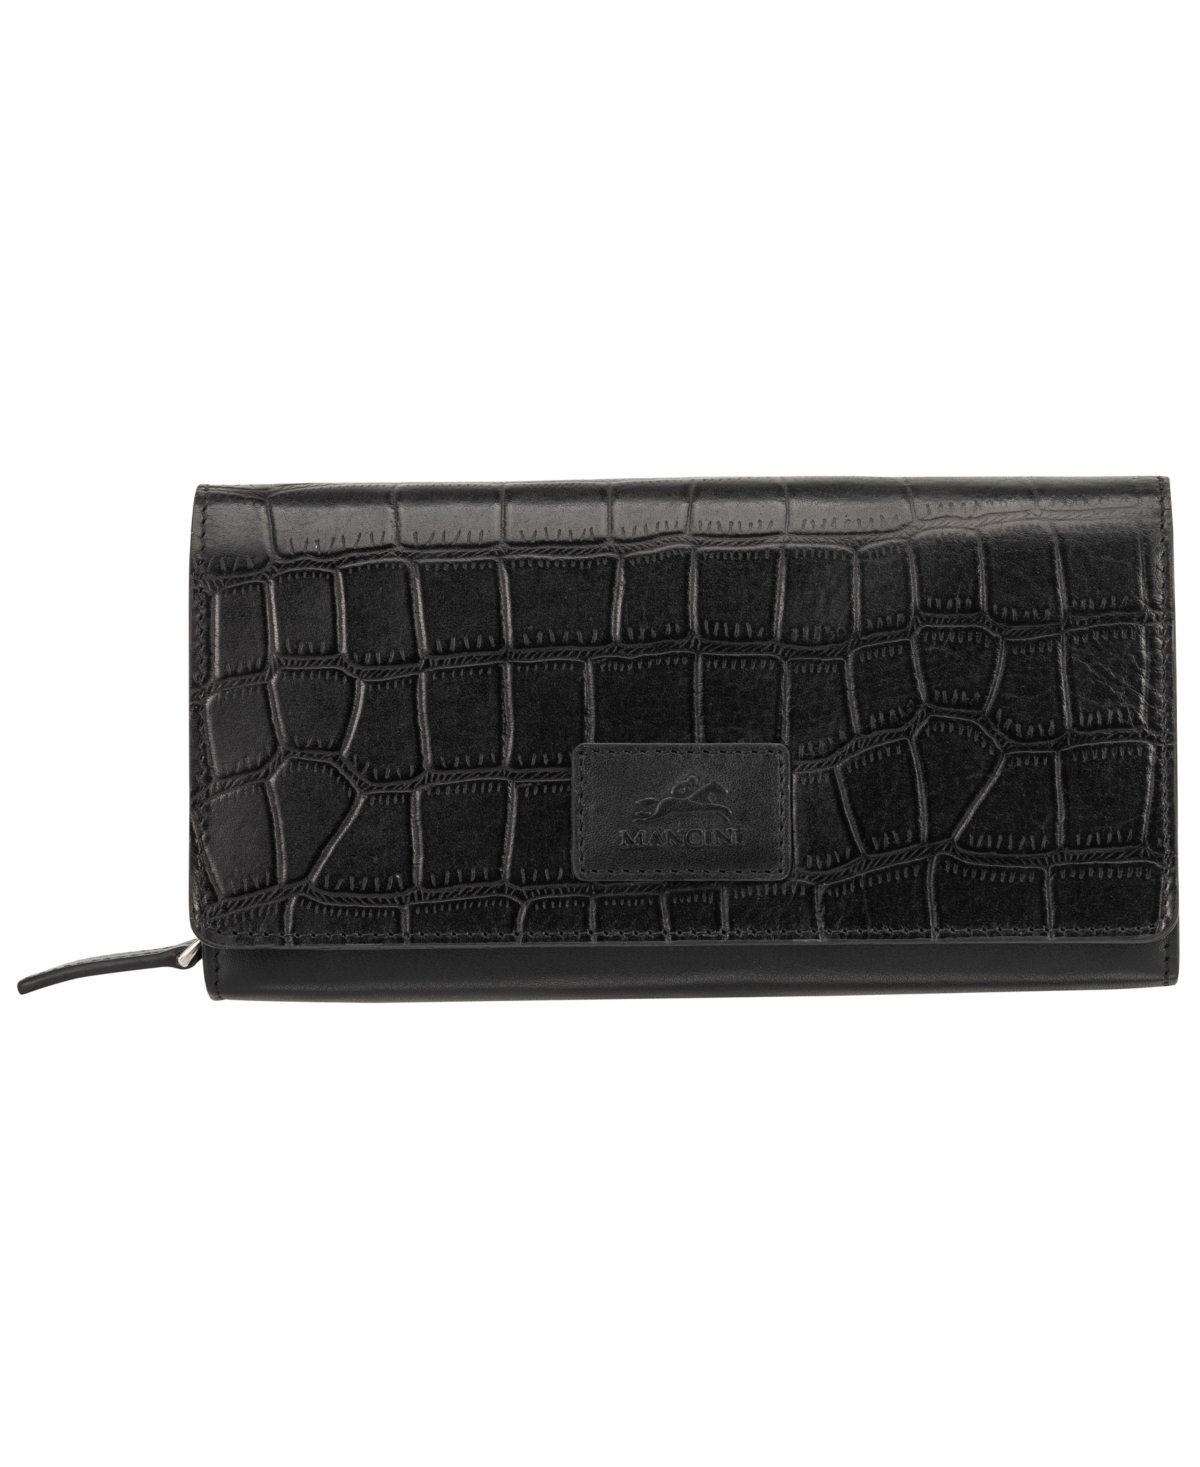 Mancini Women's Croco Collection Rfid Secure Clutch Wallet